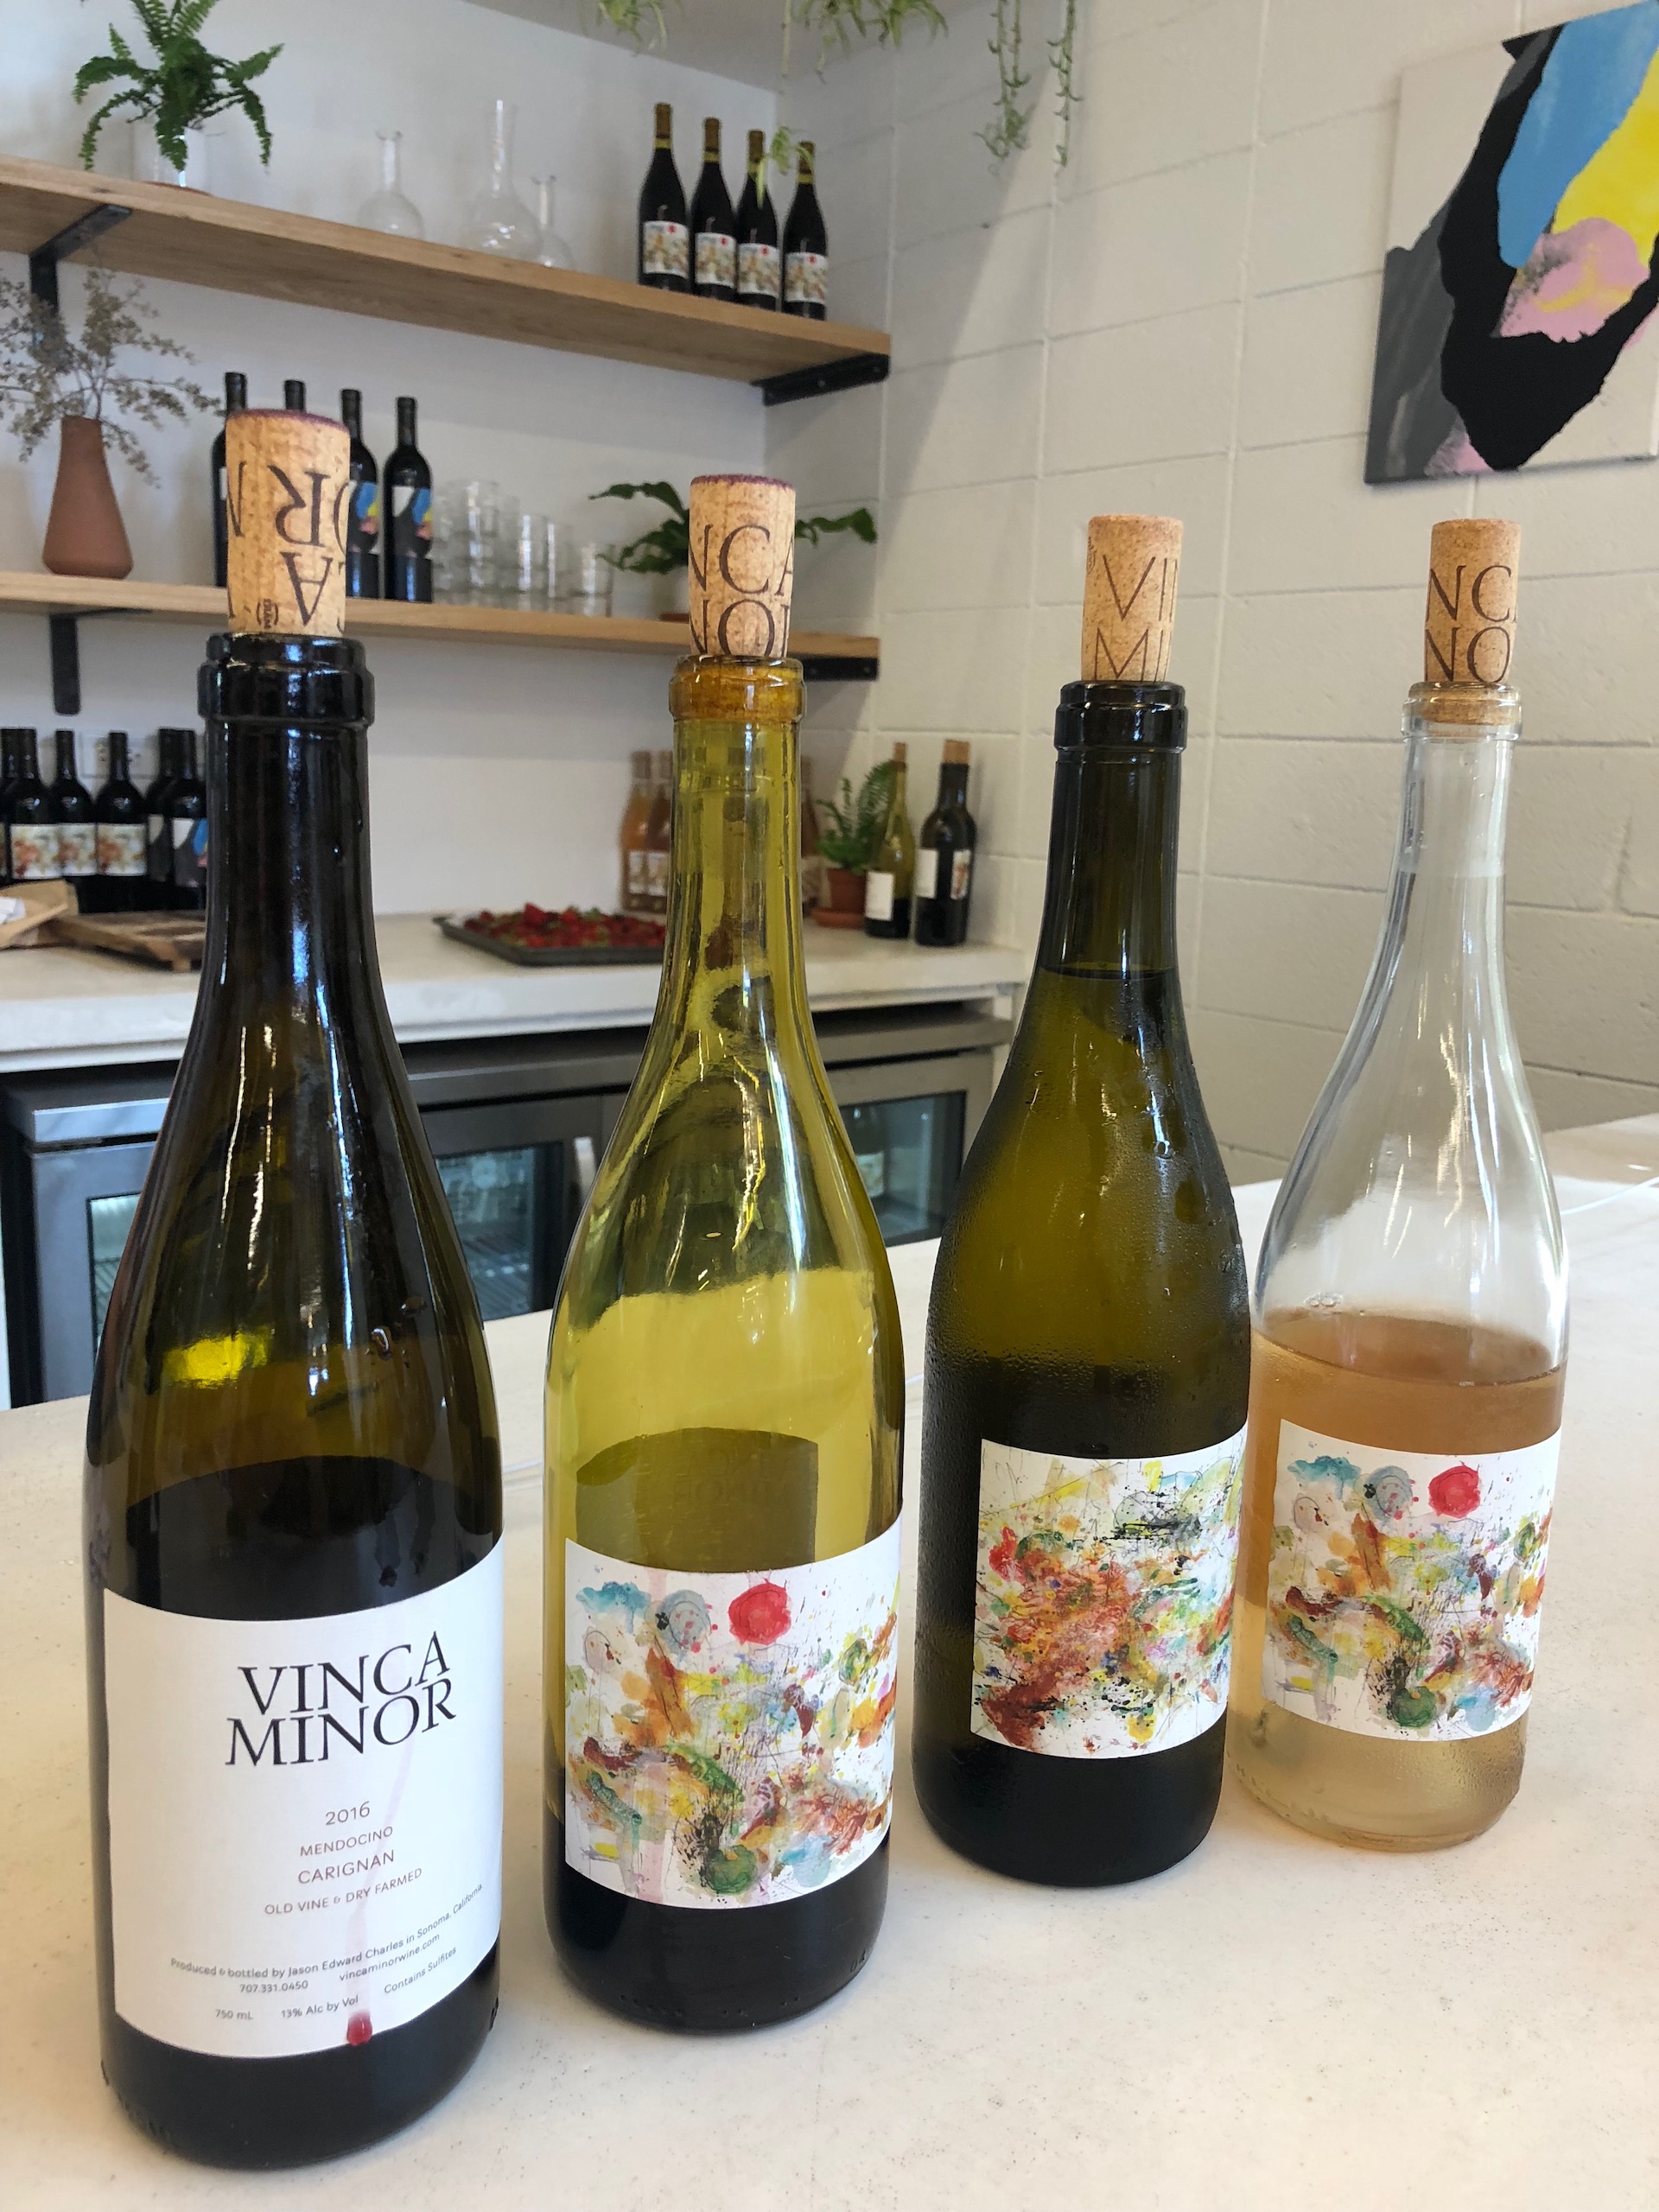 The exciting Chardonnays and Carignans from Vinca Minor